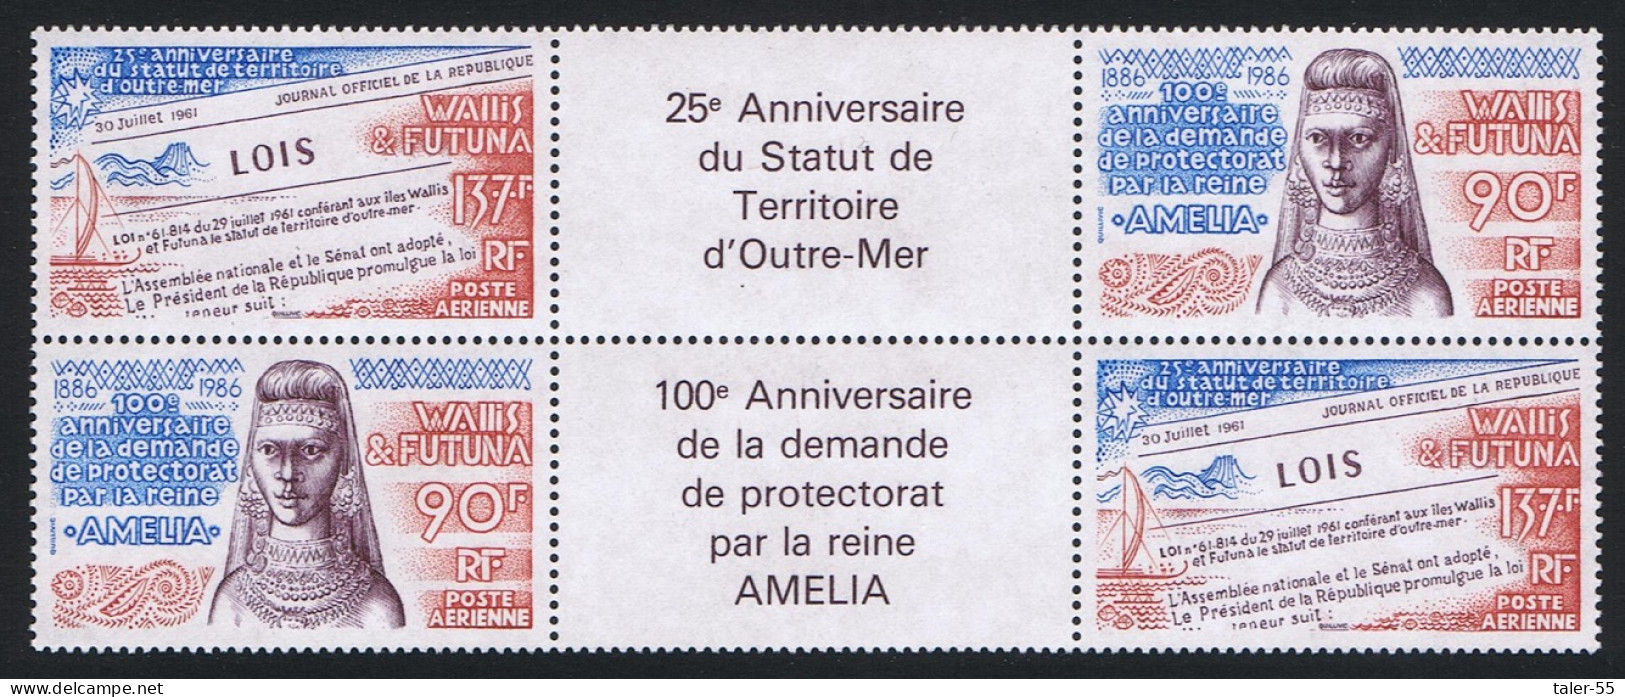 Wallis And Futuna French Overseas Territory Tete-beche Of 4v Type 1 1986 MNH SG#492-493 Sc#C148-149a - Unused Stamps